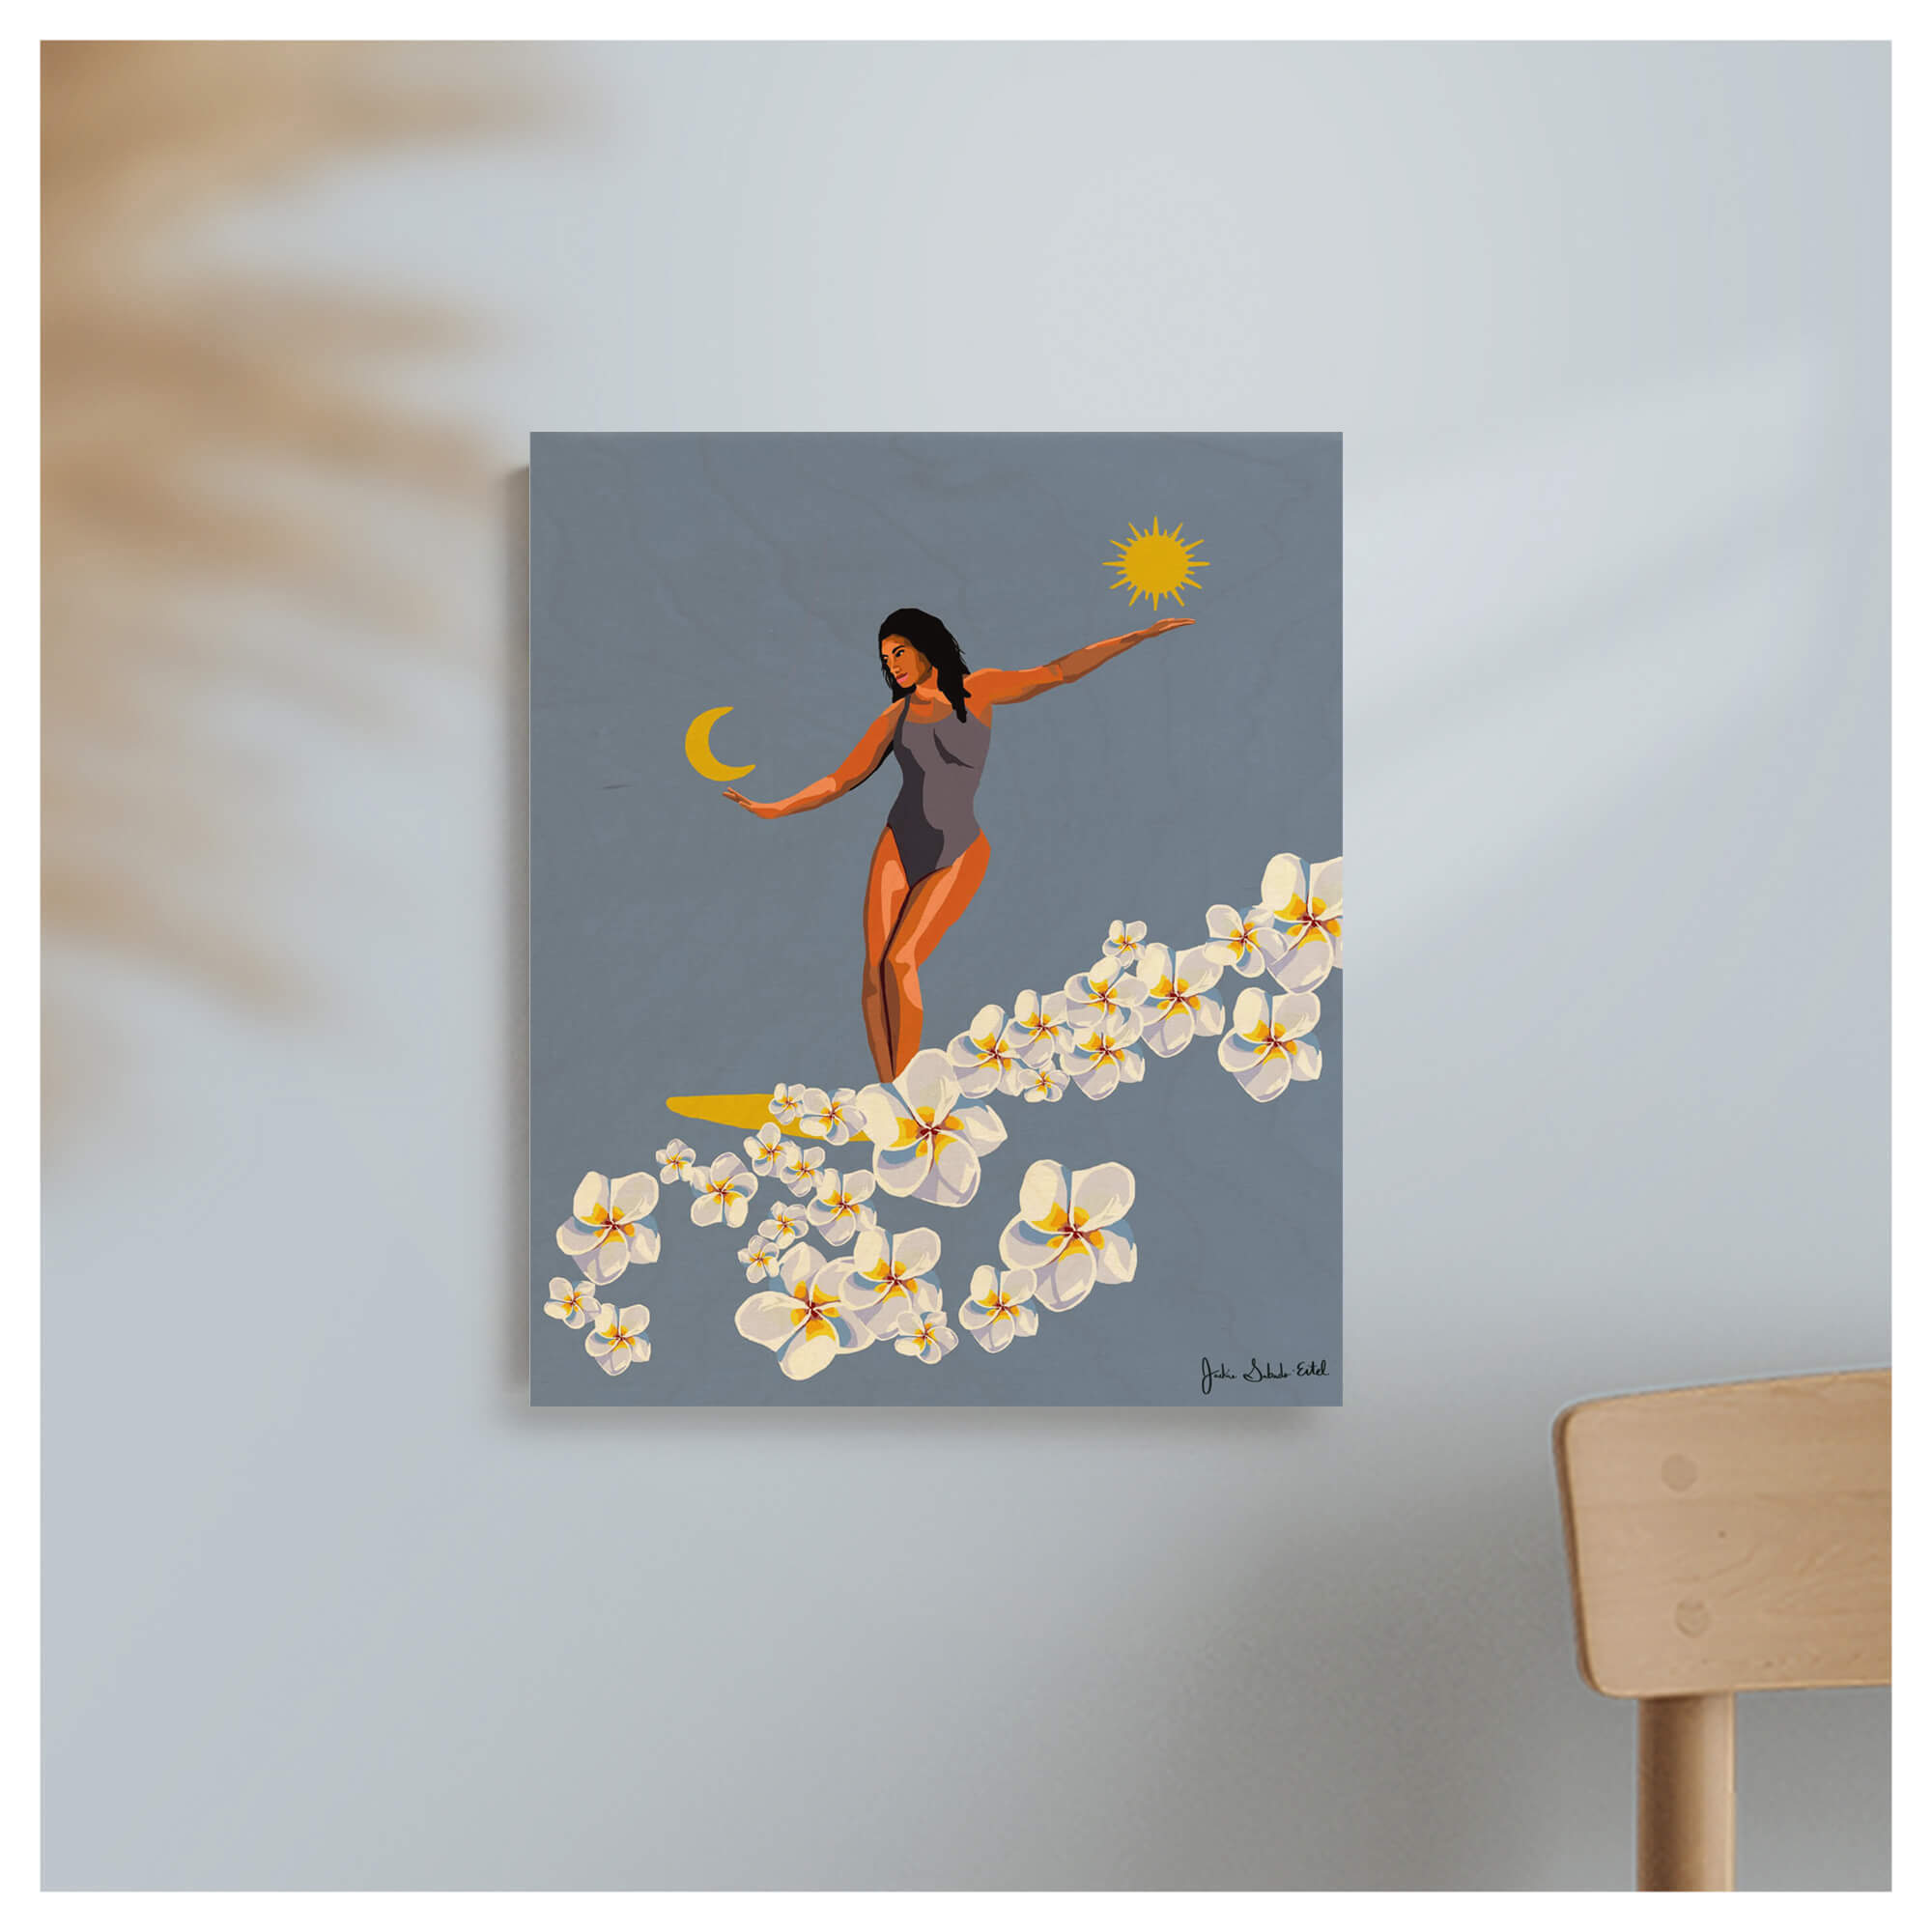 A woman on a surfboard with white plumeria flowers by Hawaii artist Jackie Eitel